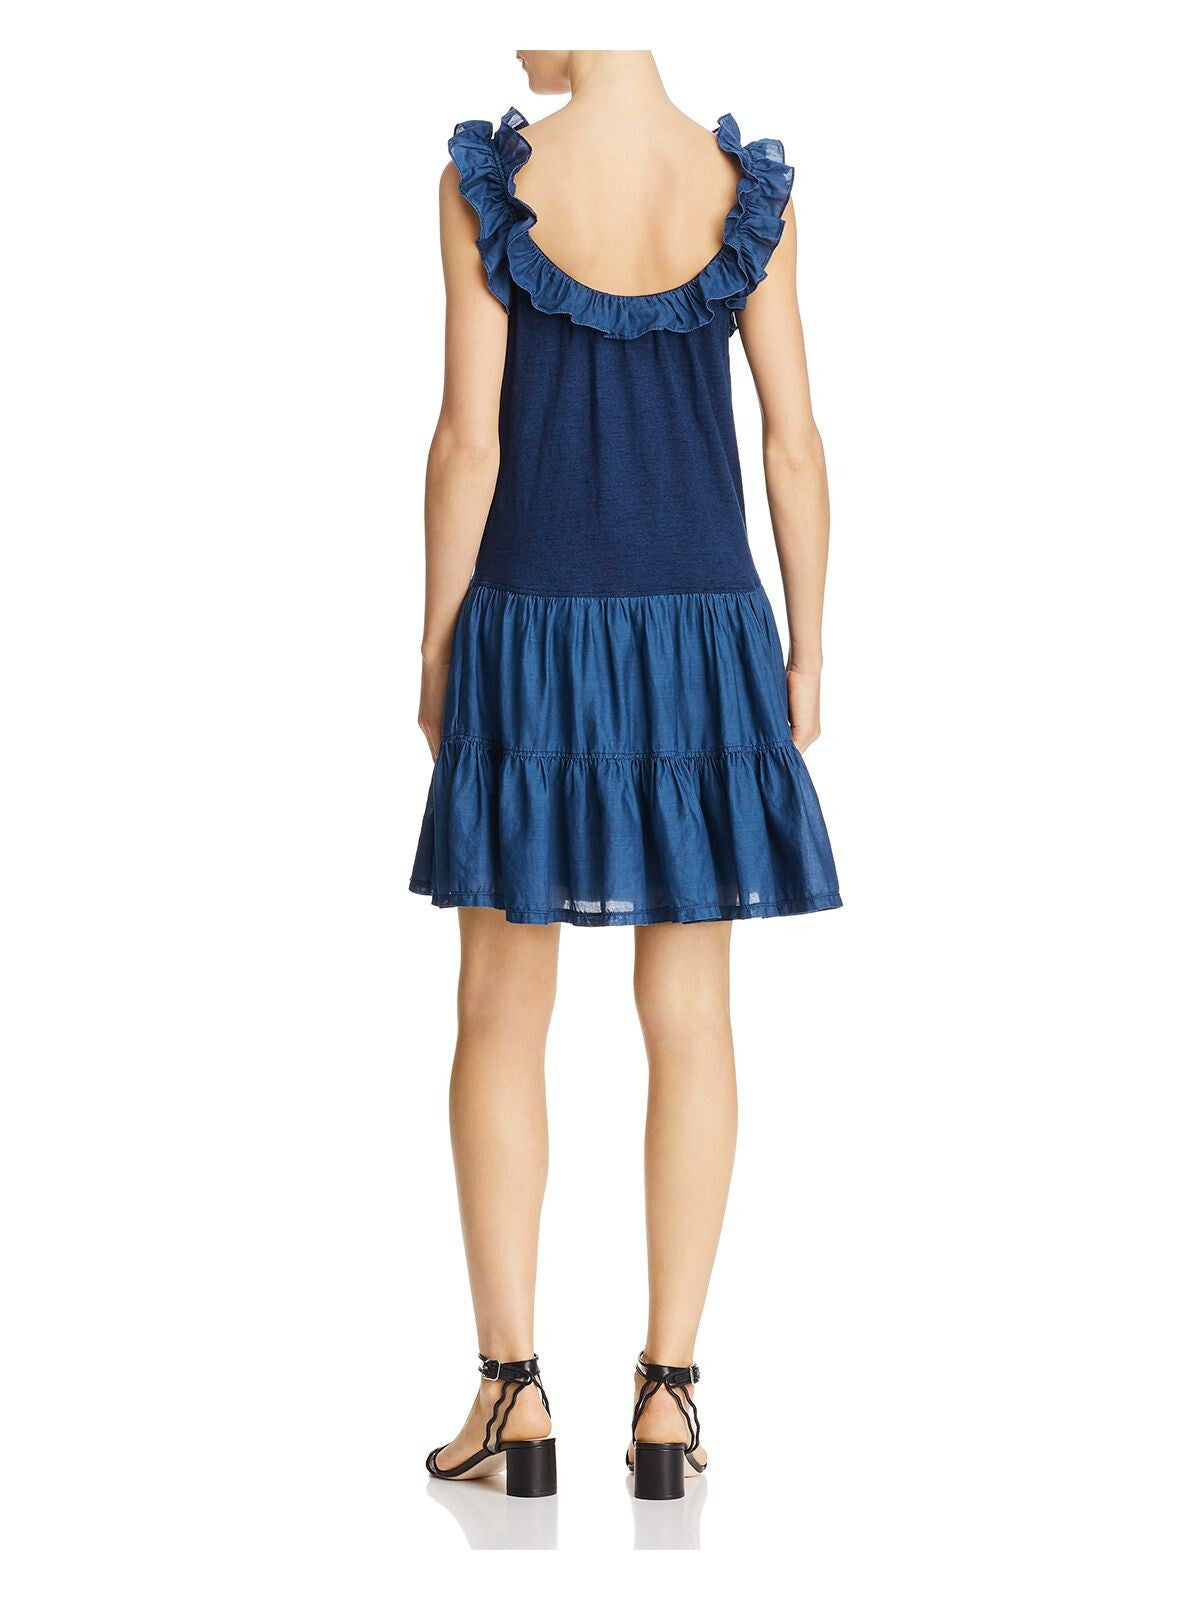 LA VIE BY REBECCA TAYLOR Womens Blue Low Back Heather Spaghetti Strap Scoop Neck Above The Knee Party Trapeze Dress M